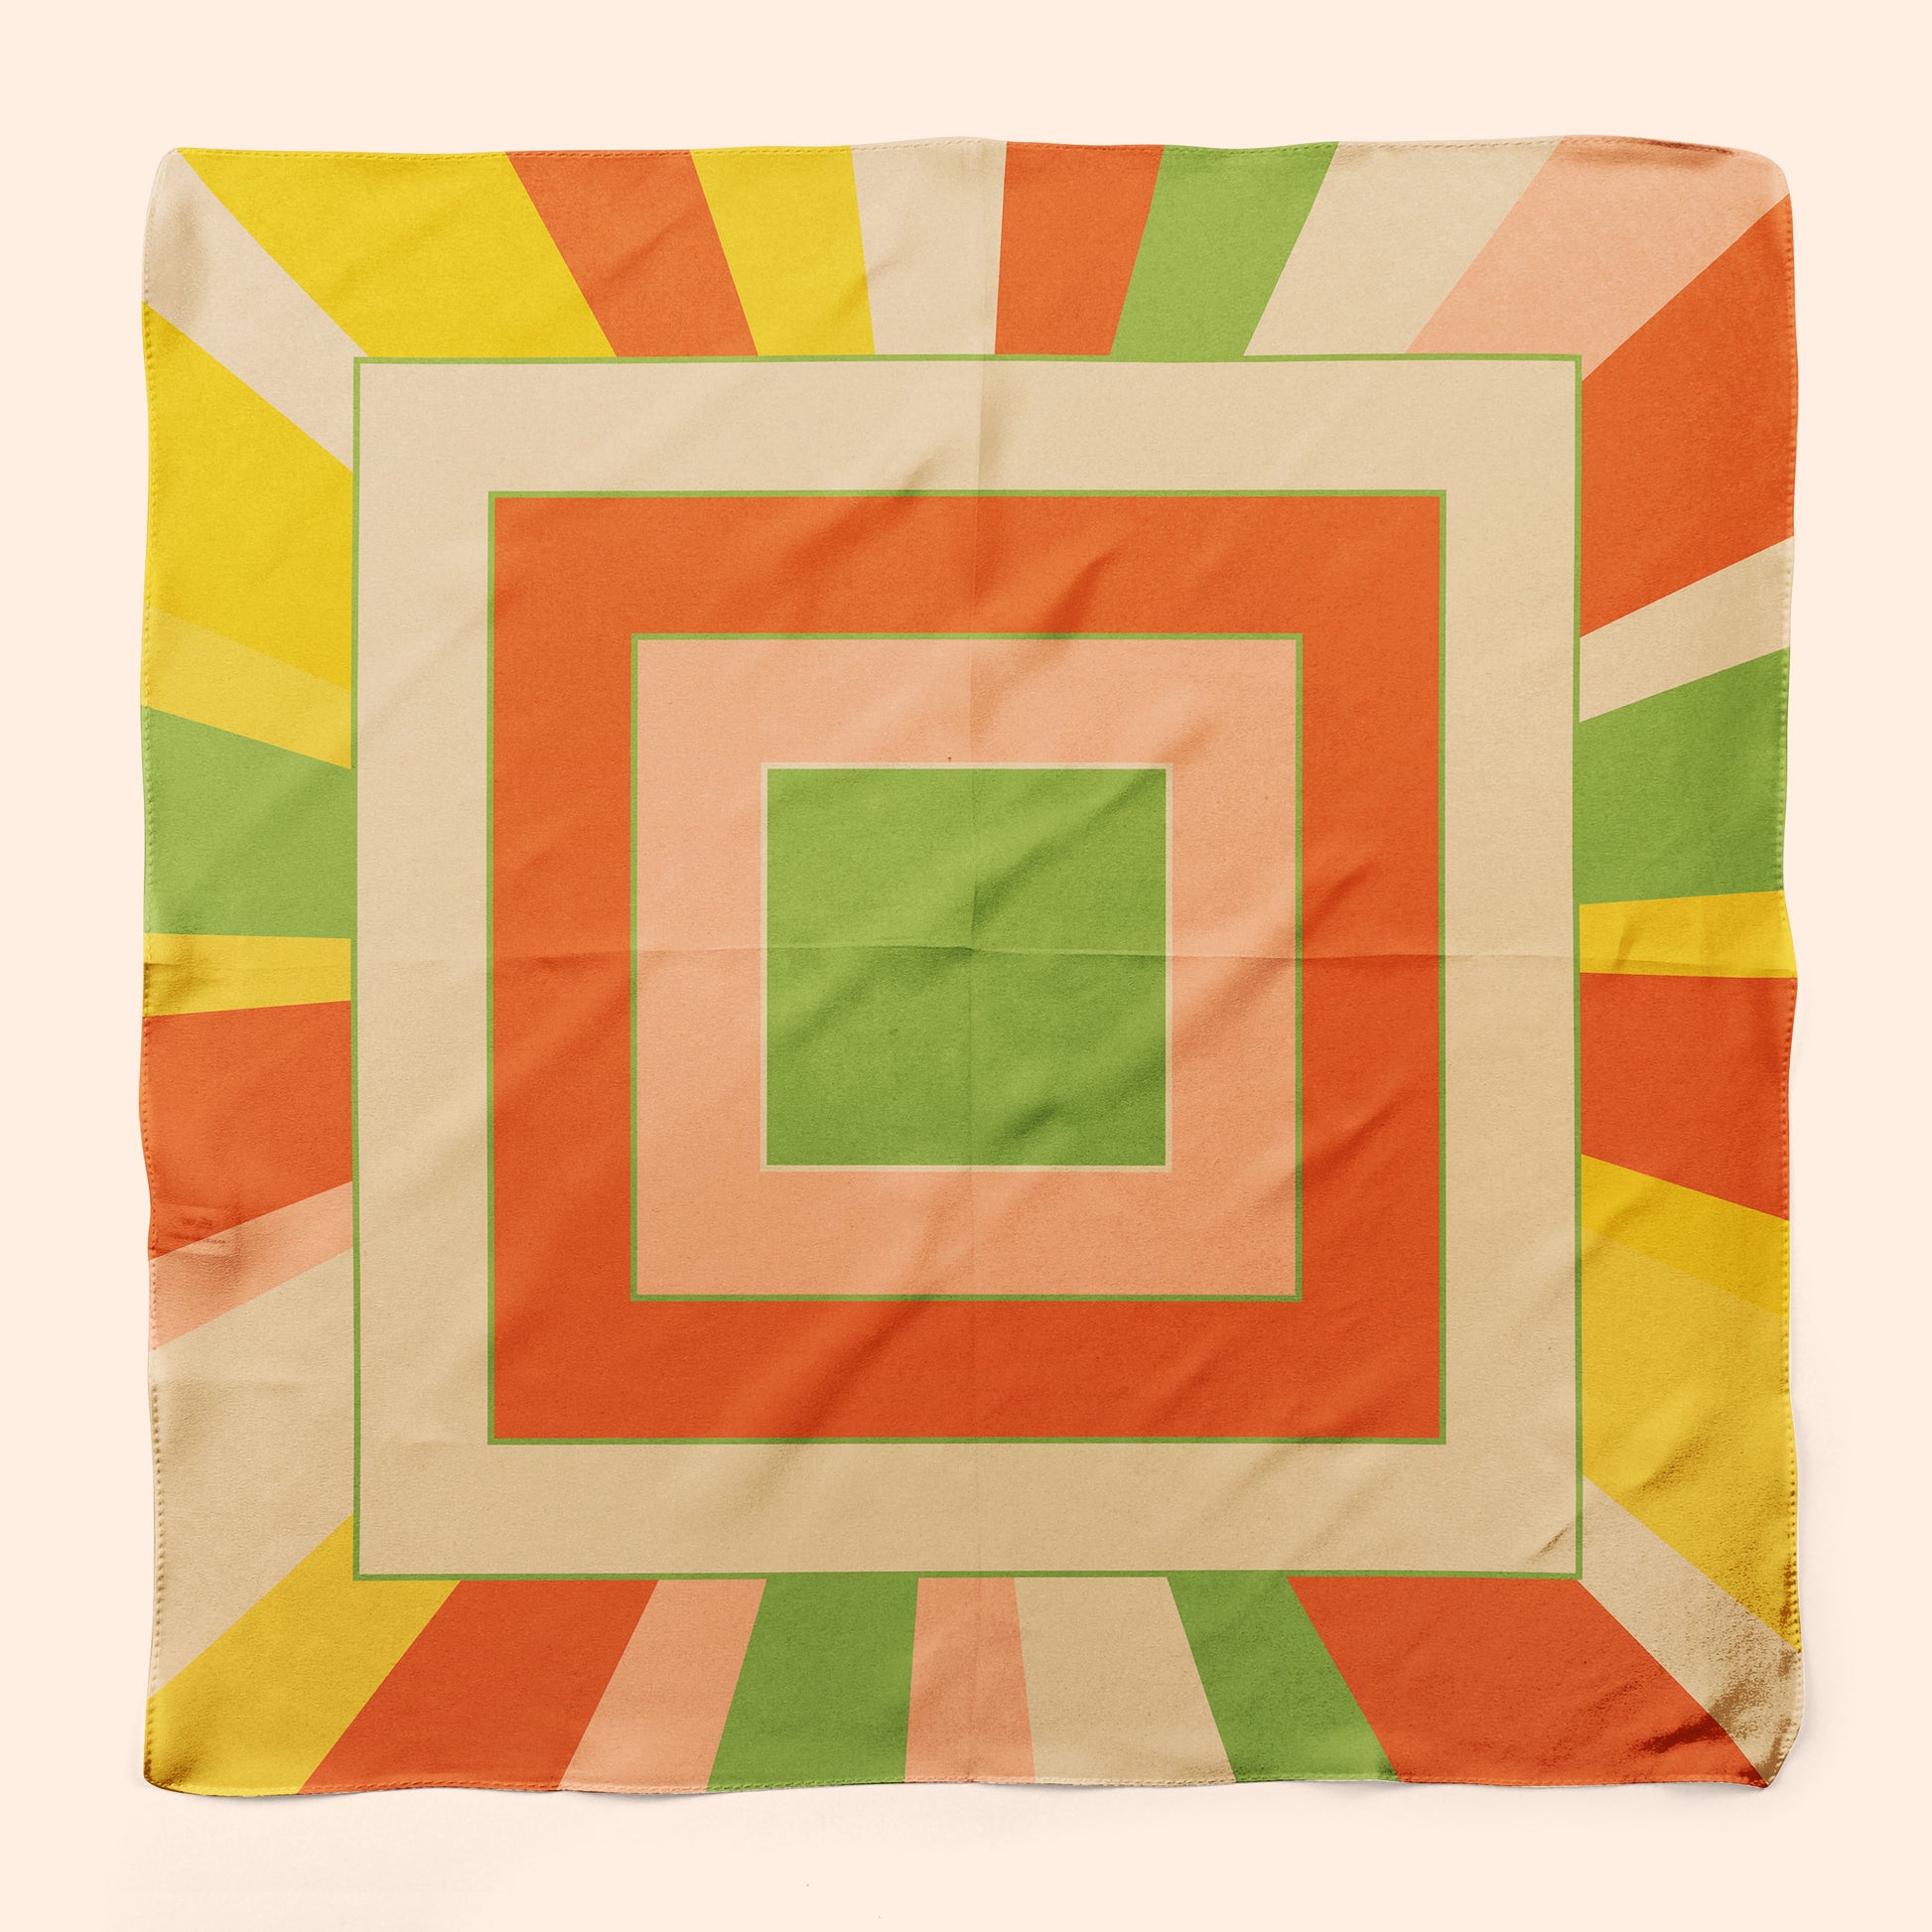 California sunset meets 90s TV in this luxury square silk scarf